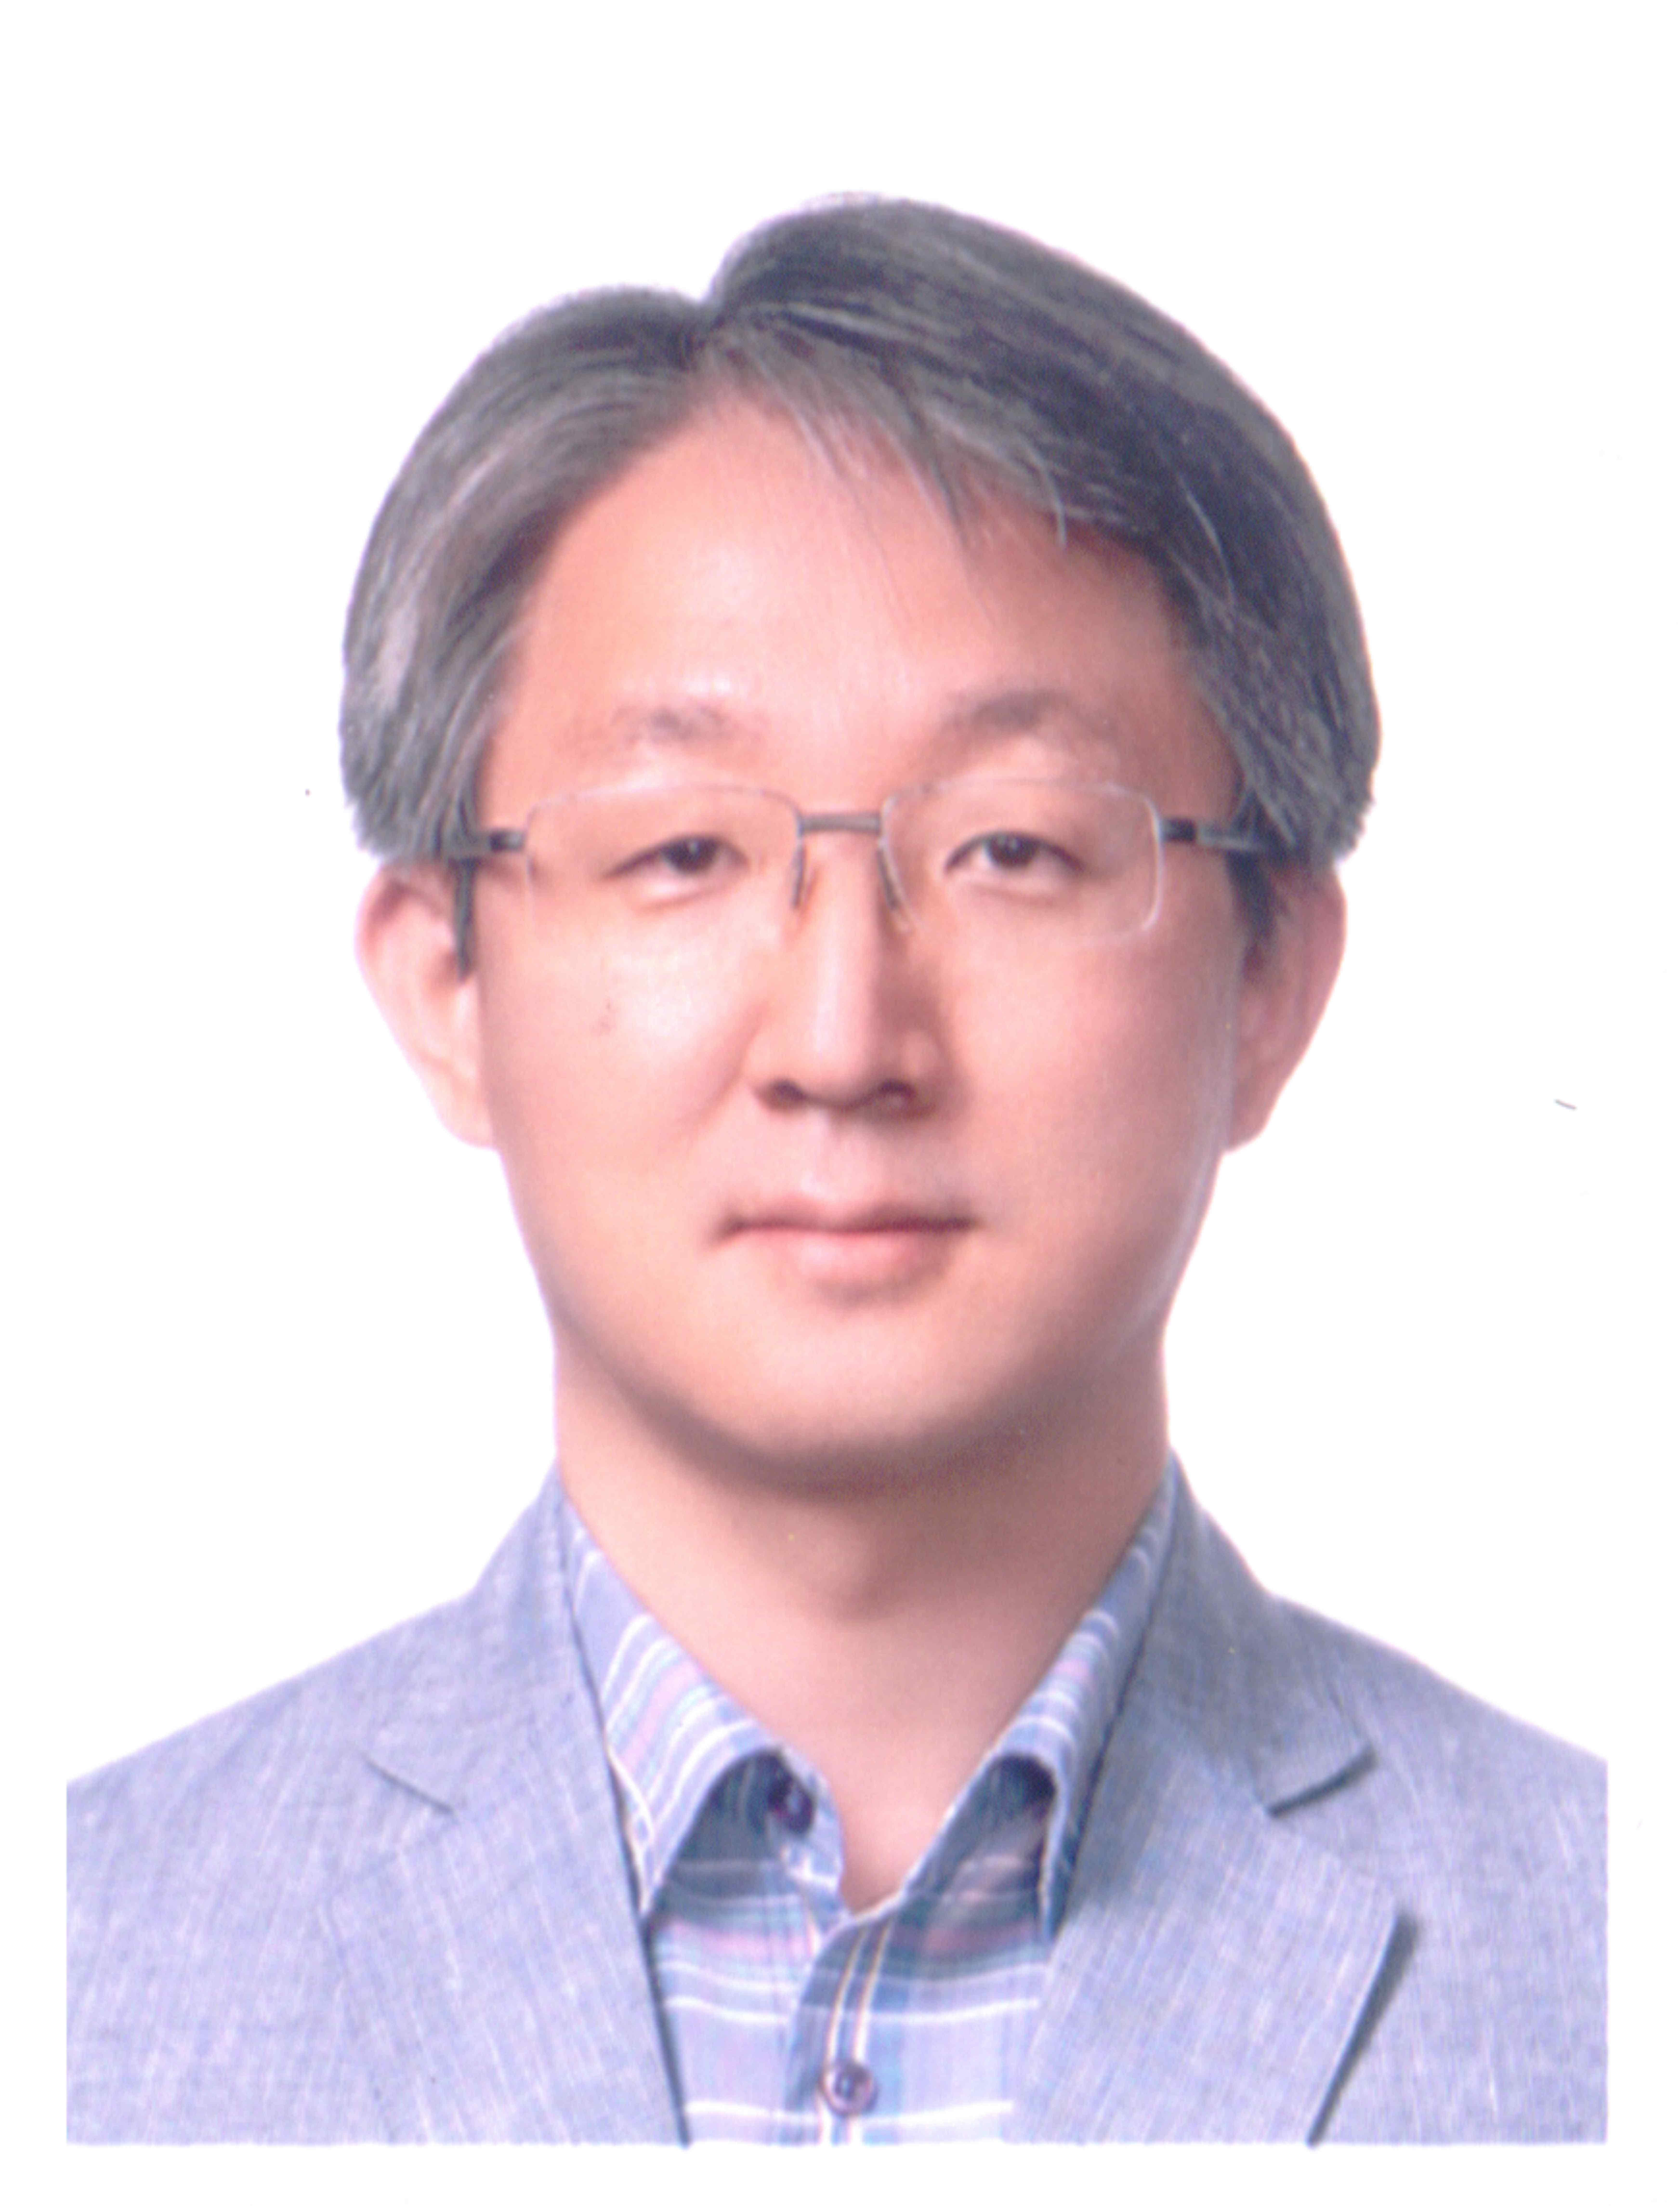 [3] H.-J. Lee, T. Chiang, and Y.-Q. Zhang, Scalable rate control for MPEG-4 video, IEEE Trans. Circuits Syst. Video Technol., vol. 10, pp. 878894, Sept. 2000. [4] Z. G. Li, F. Pan, K. P. Lim, G.